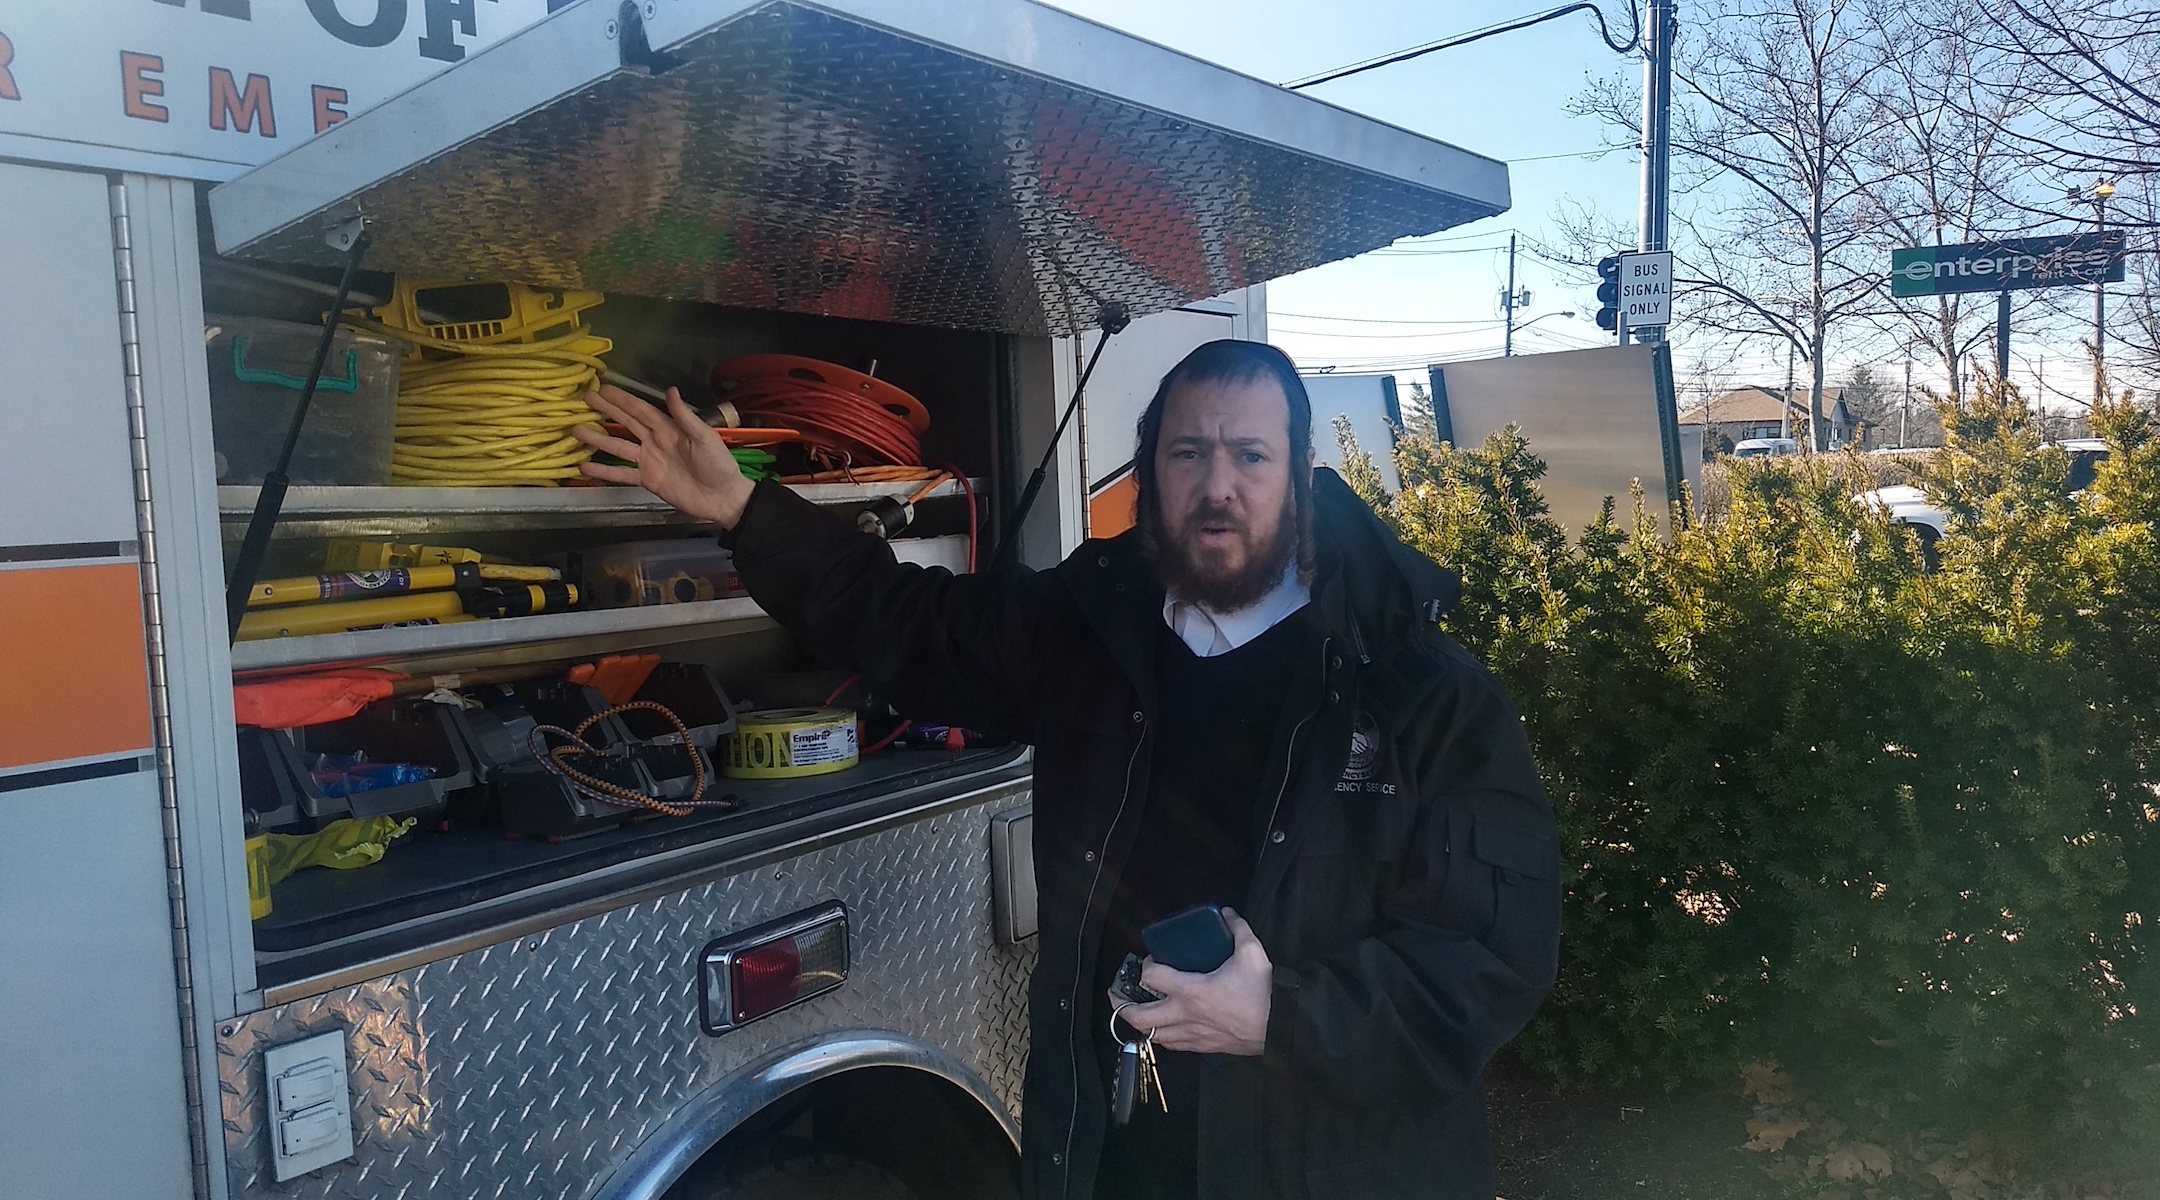 Josef Margaretten, the coordinator of Chaverim of Rockland, displays some of the emergency services agency's equipment. (Ben Sales)